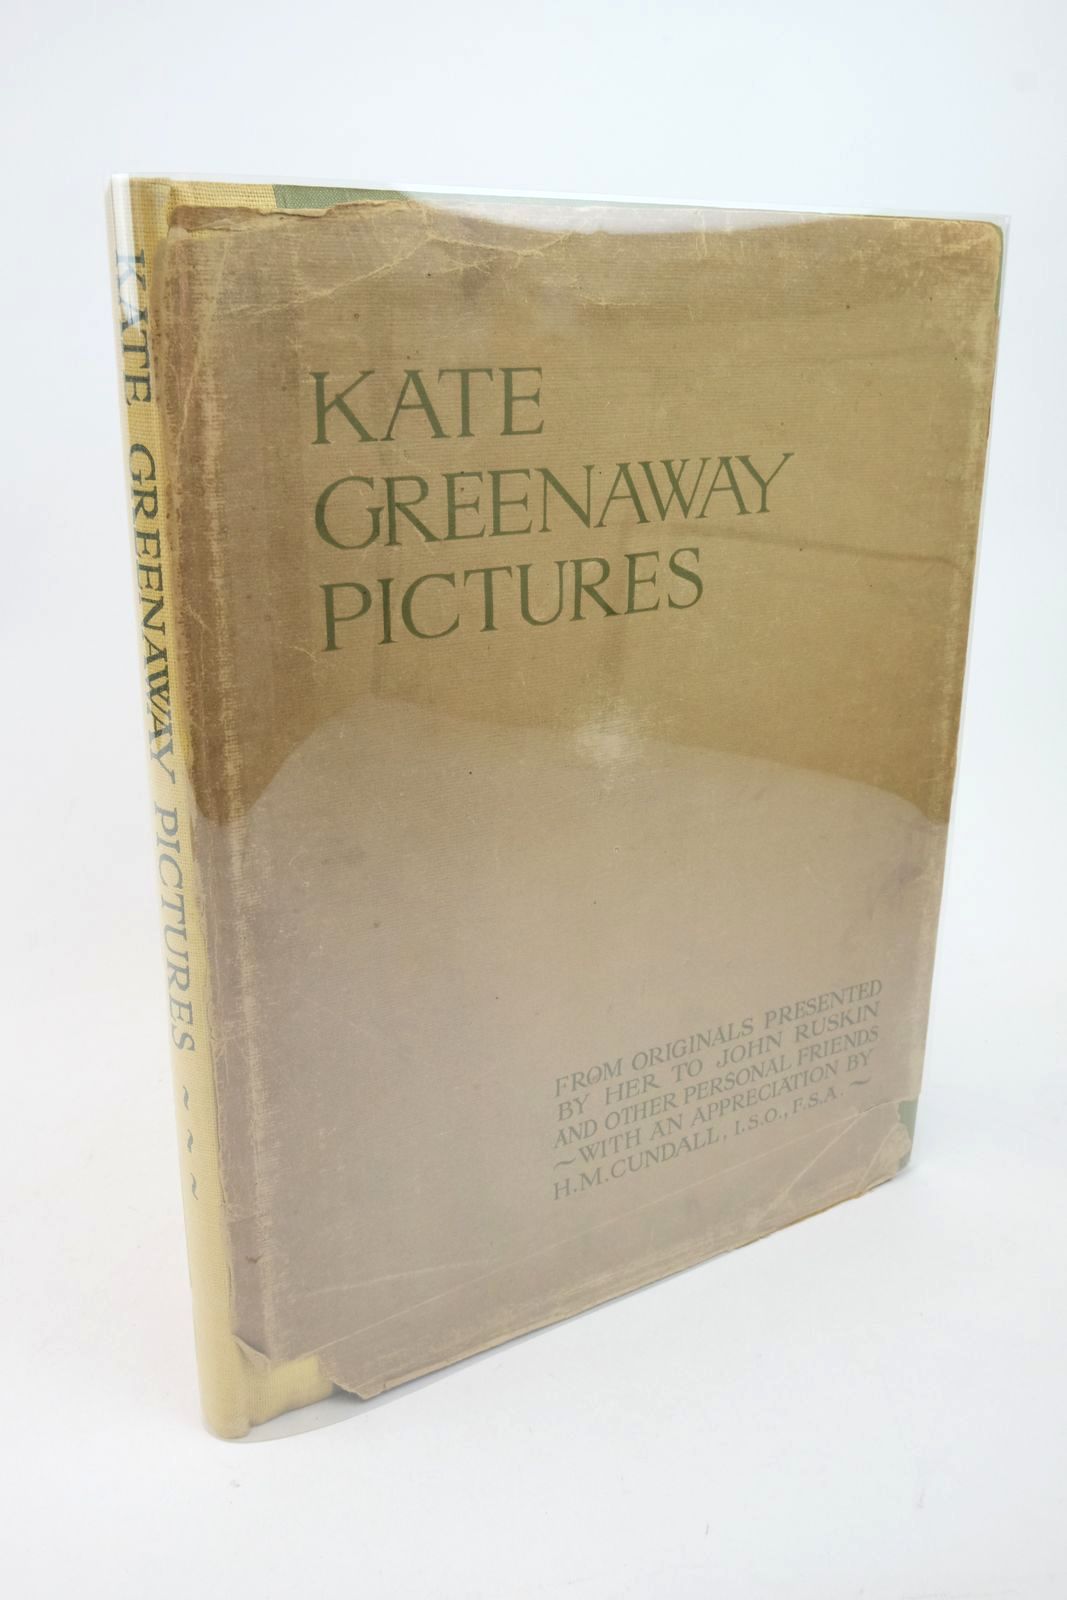 Photo of KATE GREENAWAY PICTURES written by Cundall, H.M. illustrated by Greenaway, Kate published by Frederick Warne &amp; Co Ltd. (STOCK CODE: 1322845)  for sale by Stella & Rose's Books